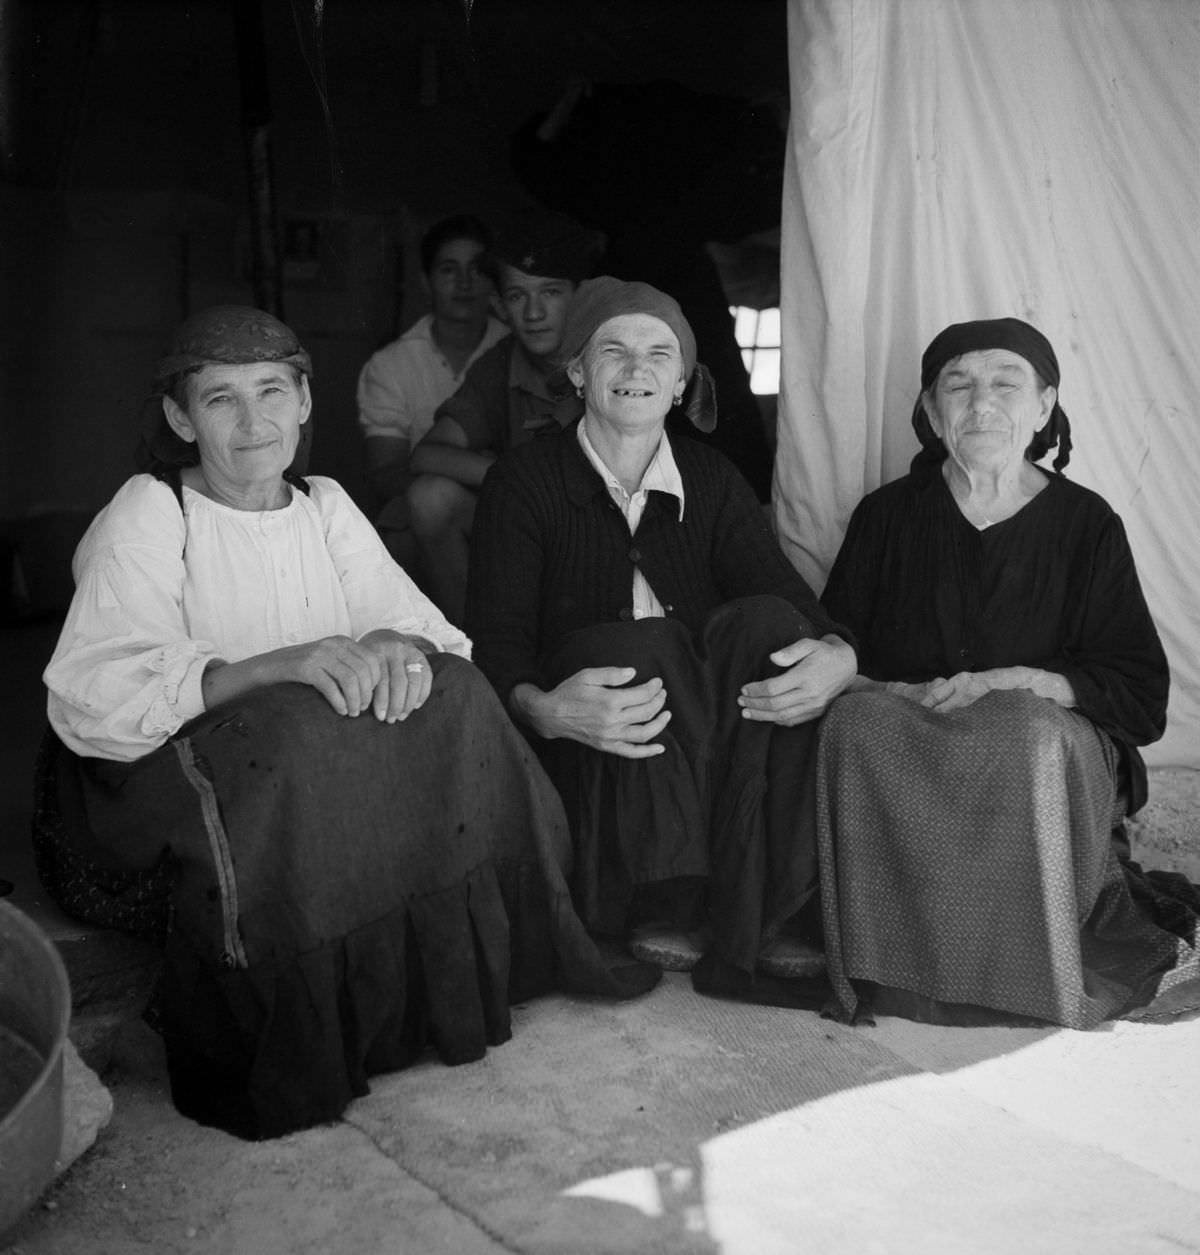 A Glimpse into the Lives of War Refugees: The El Shatt Camps in Egypt during WWII